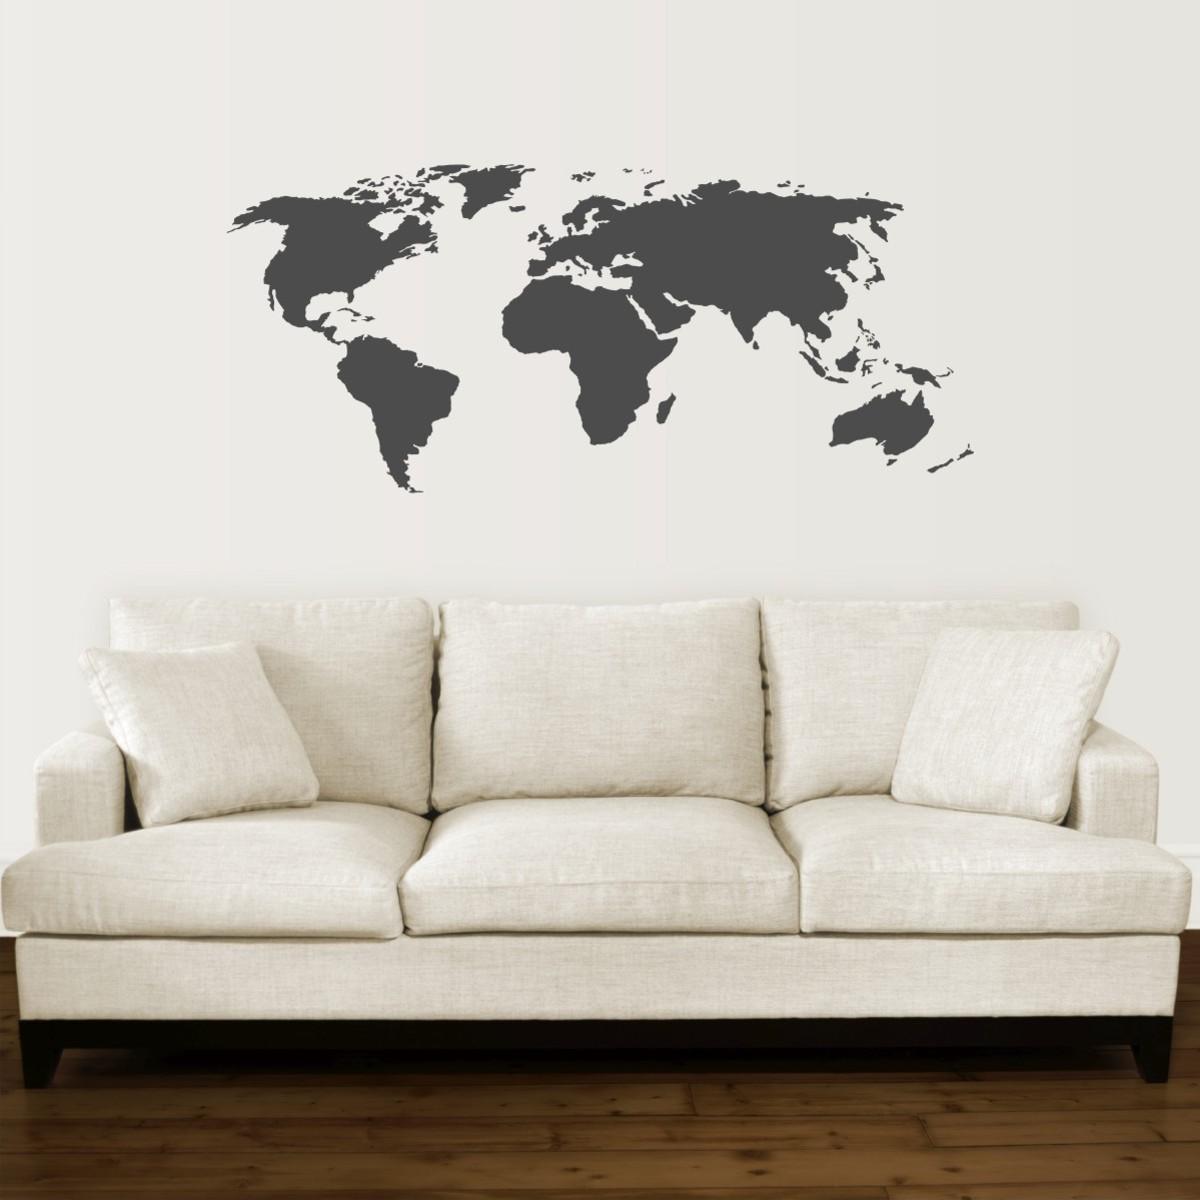 Oversized World Map Wall Quotes™ Wall Art Decal | WallQuotes.com